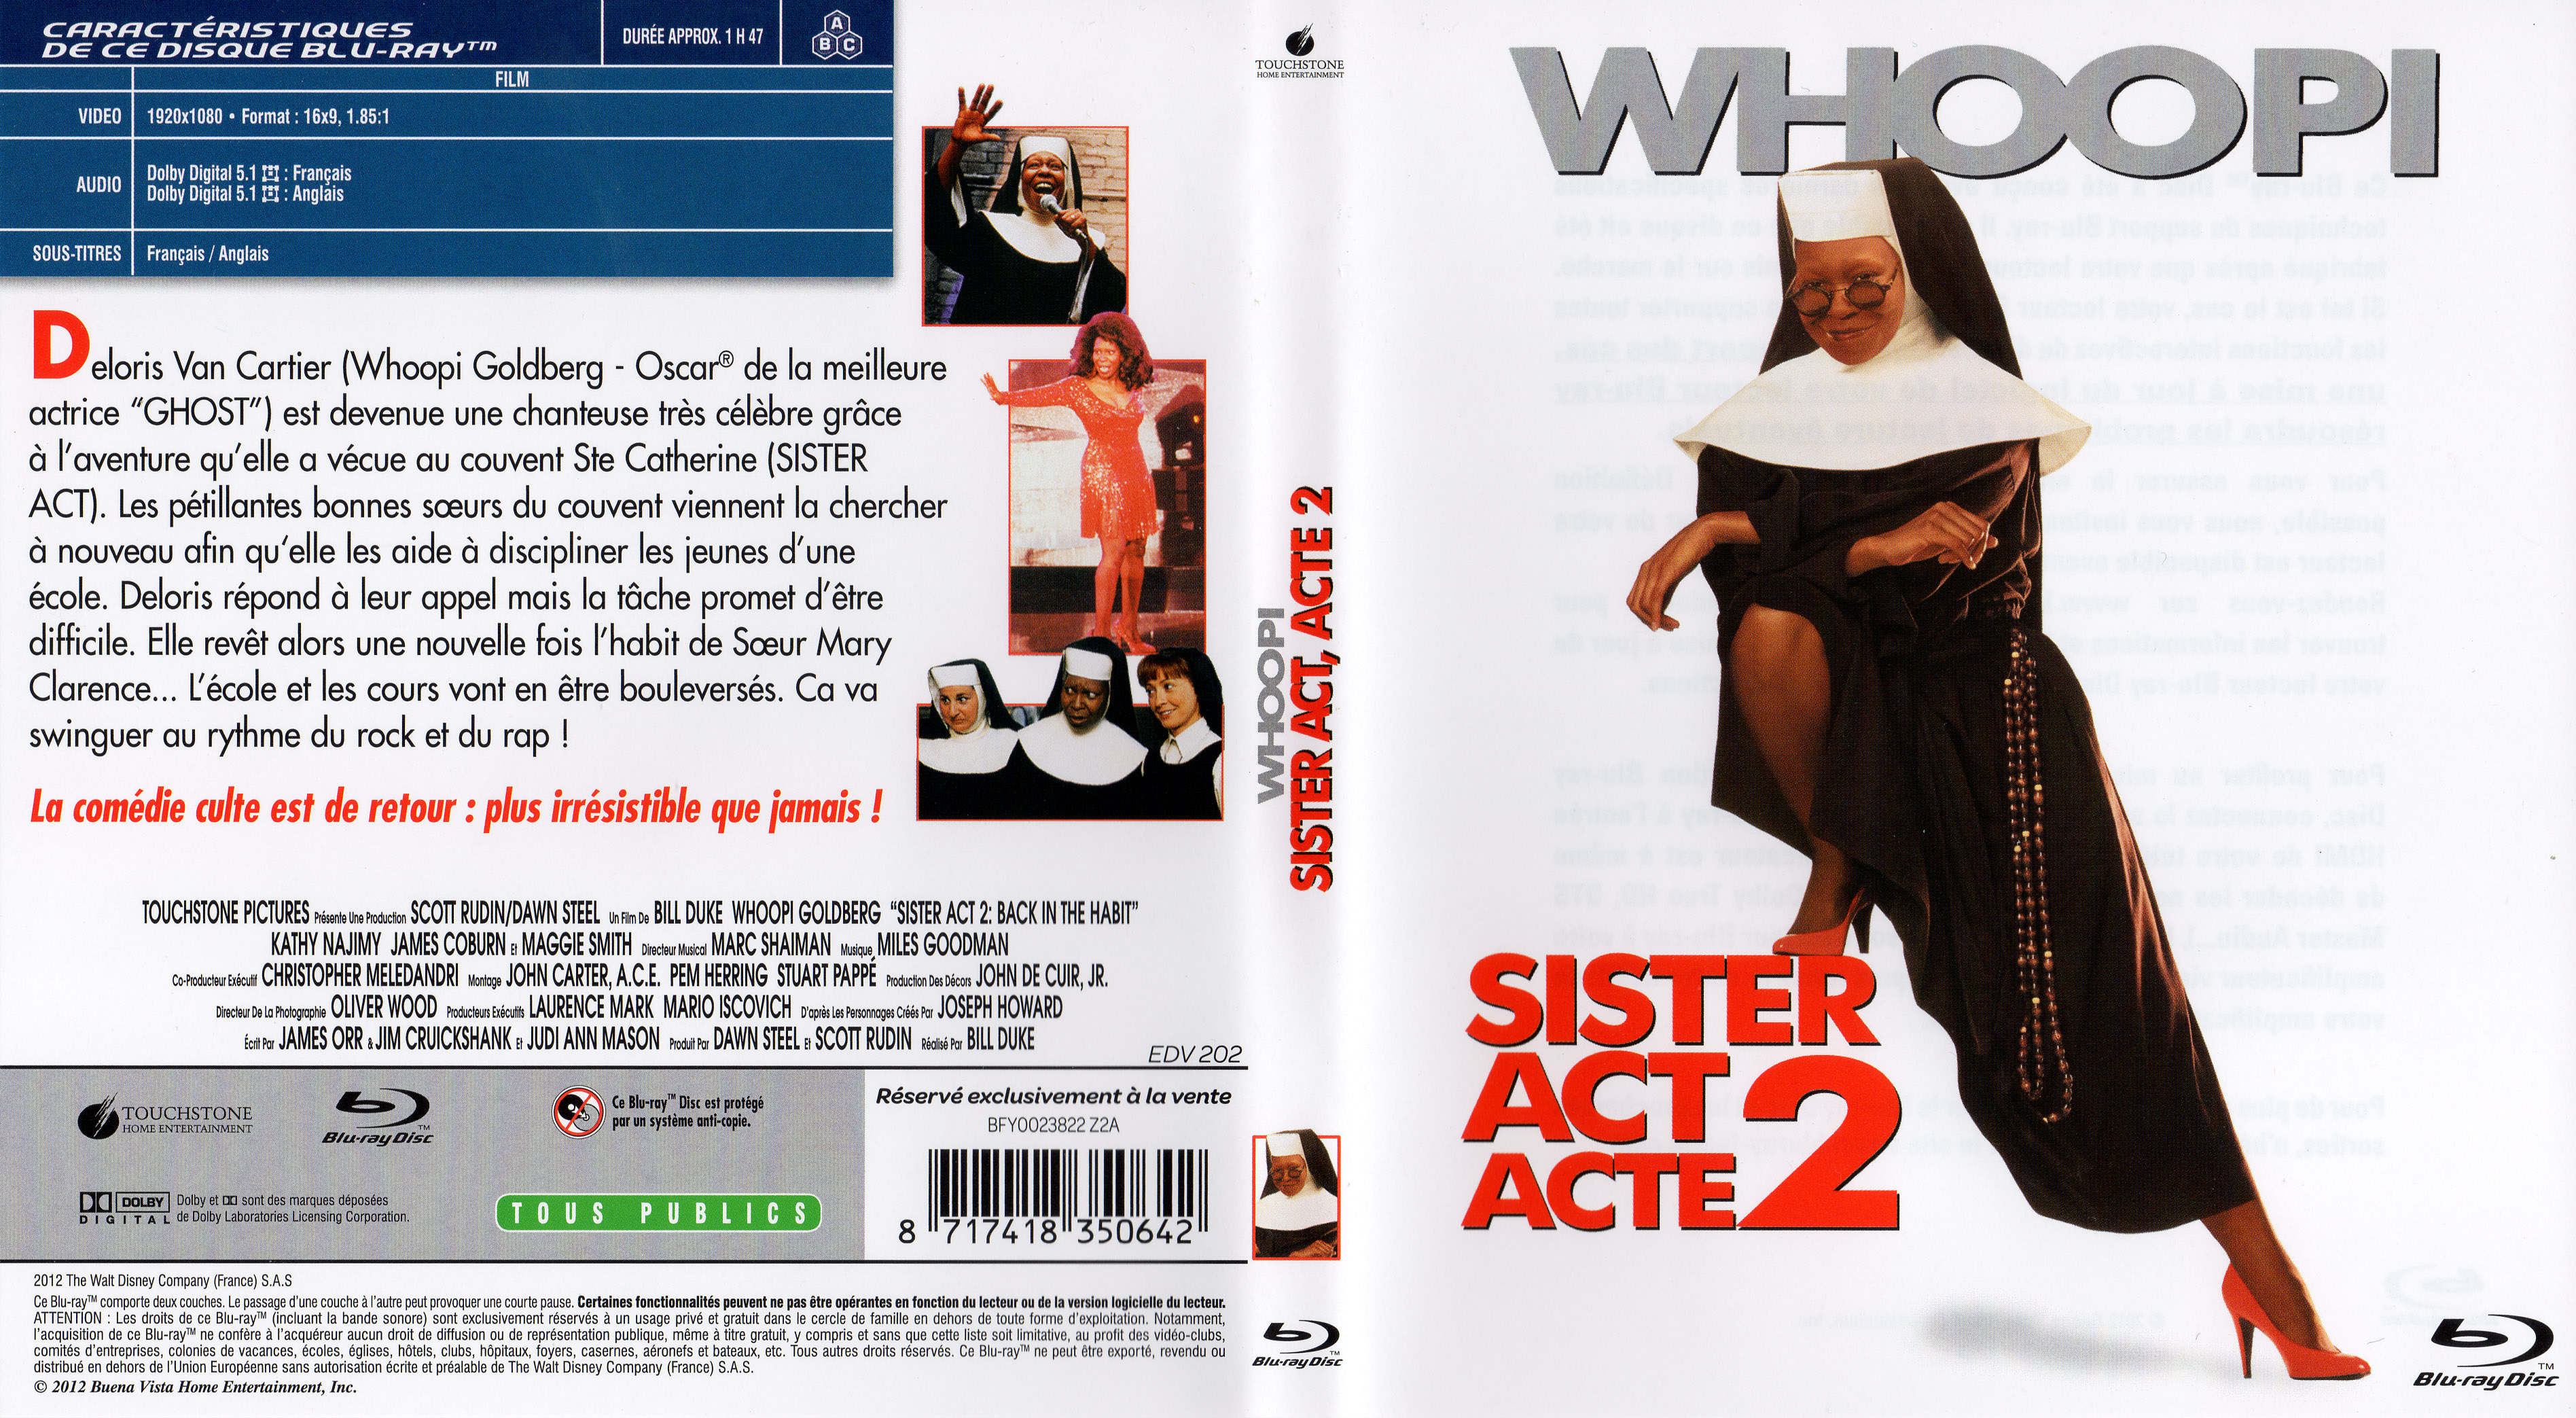 Jaquette DVD Sister act acte 2 (BLU-RAY)